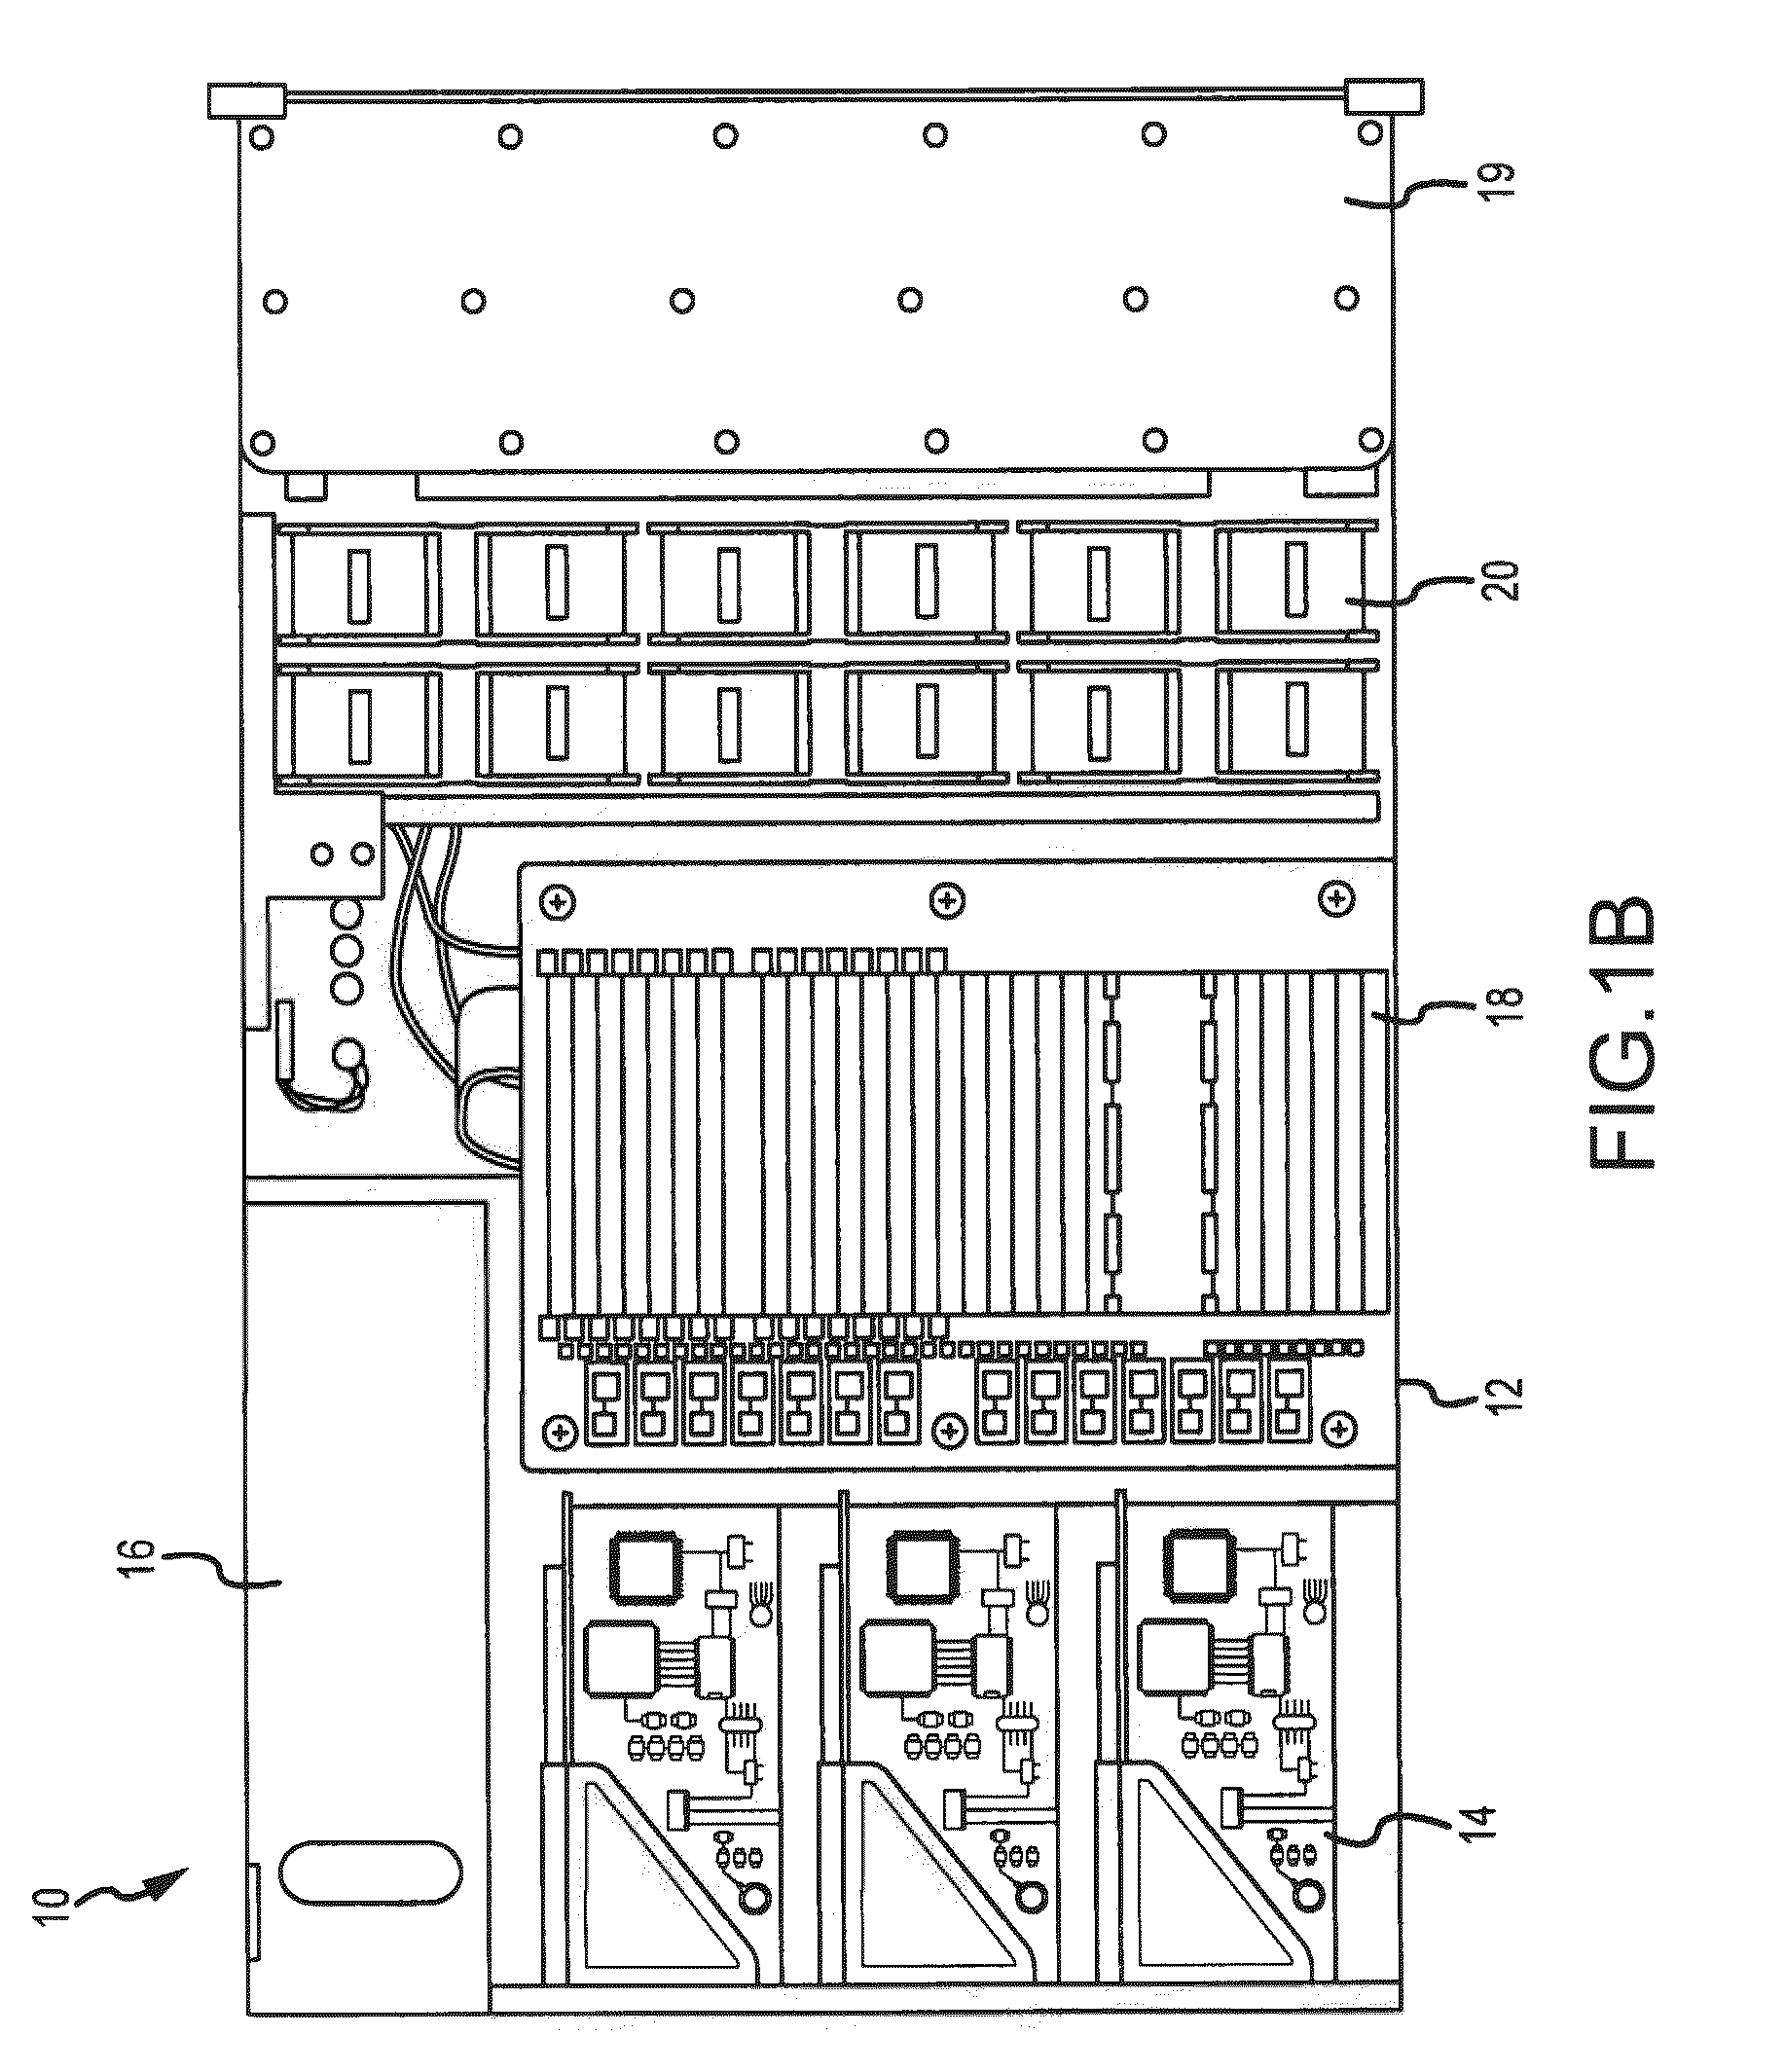 System for minimizing mechanical and acoustical fan noise coupling